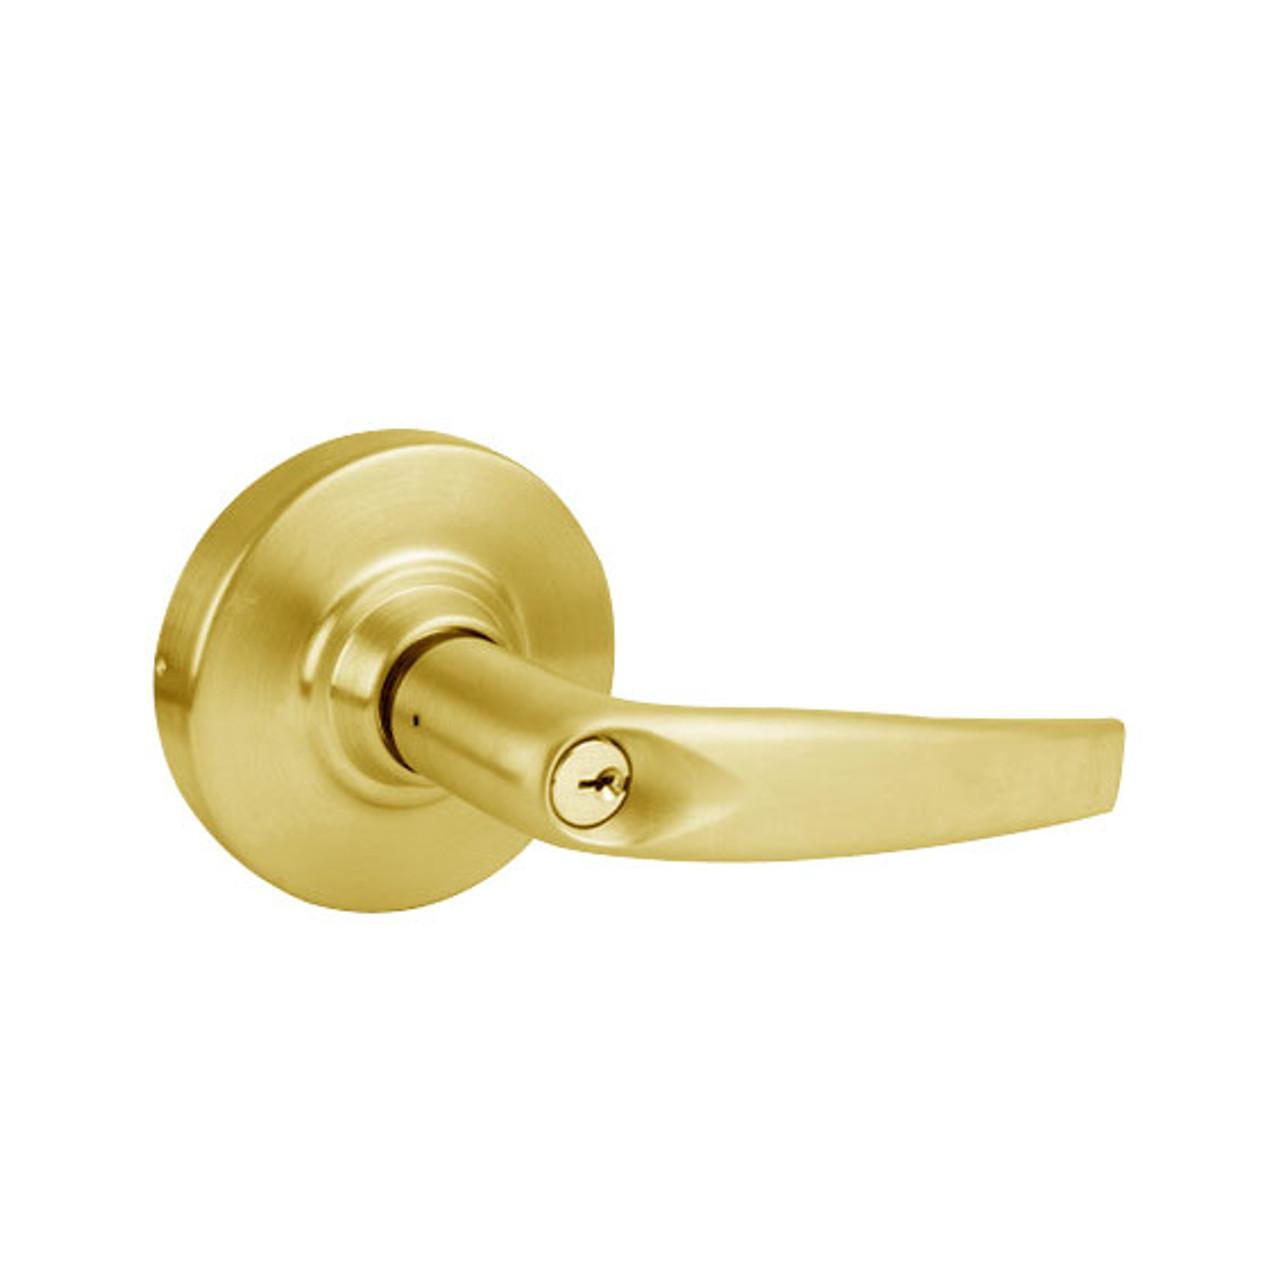 ND85PD-ATH-605 Schlage Athens Cylindrical Lock in Bright Brass